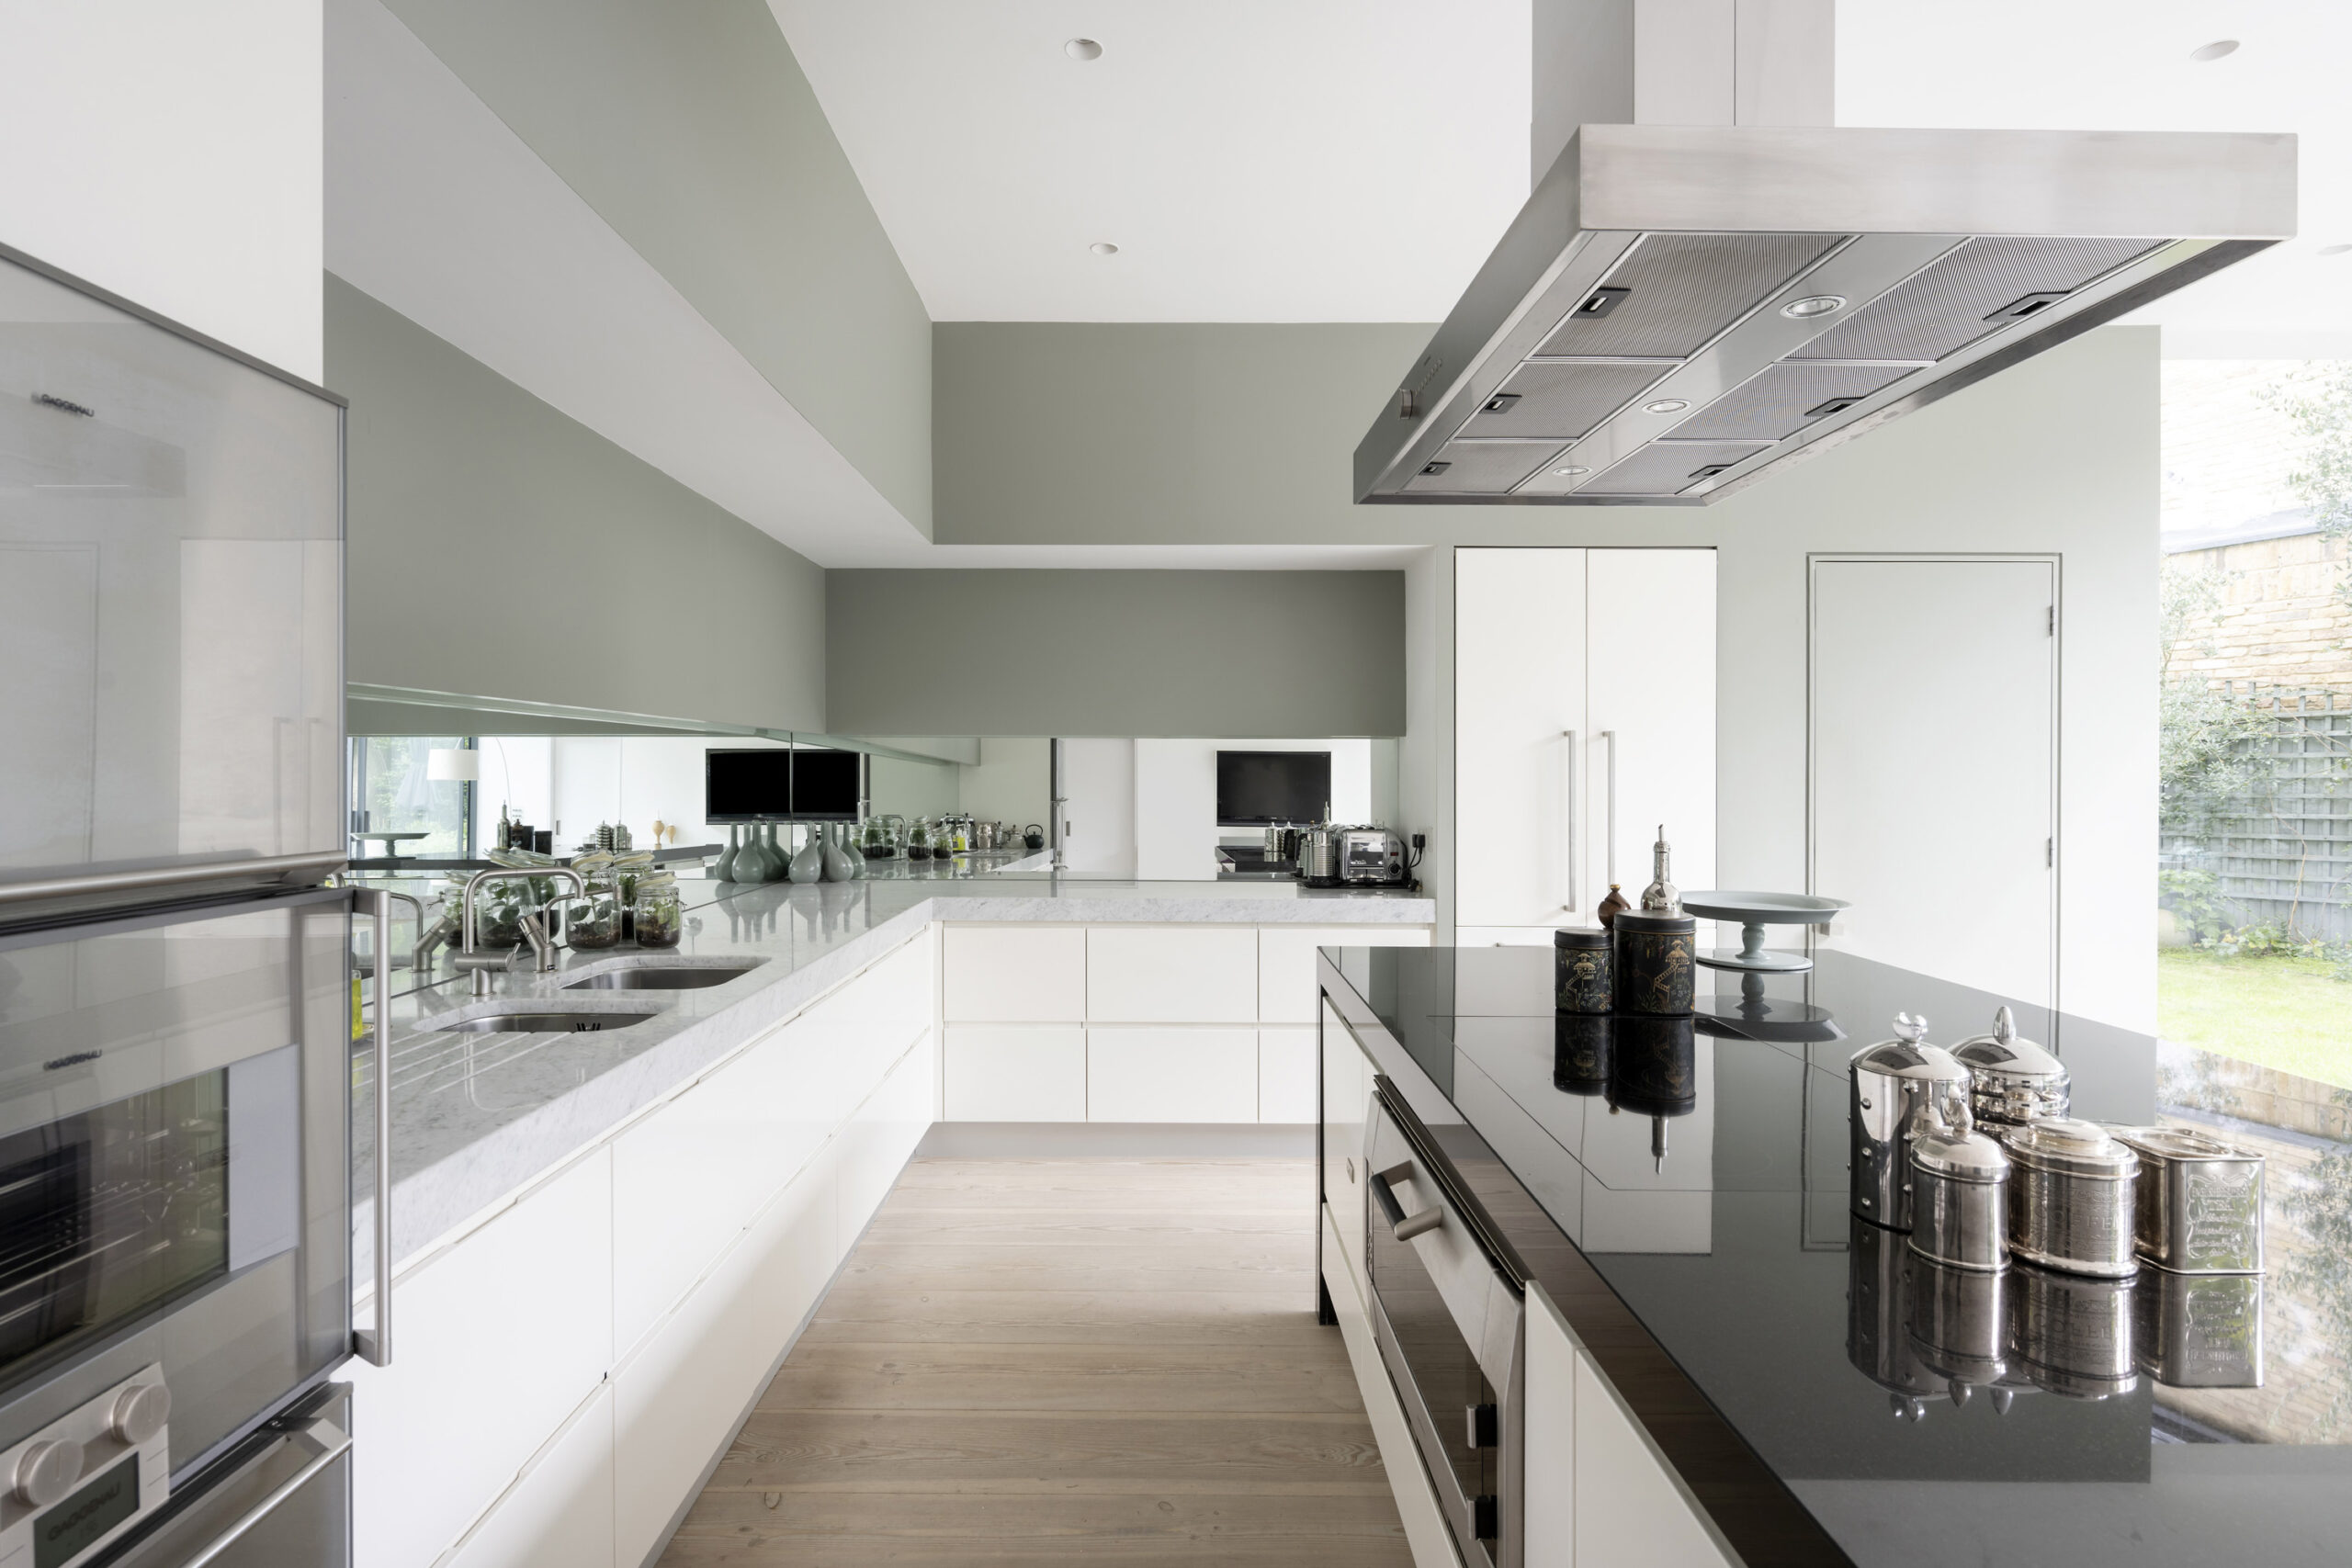 Bright modern kitchen of a house for sale in Chiswick